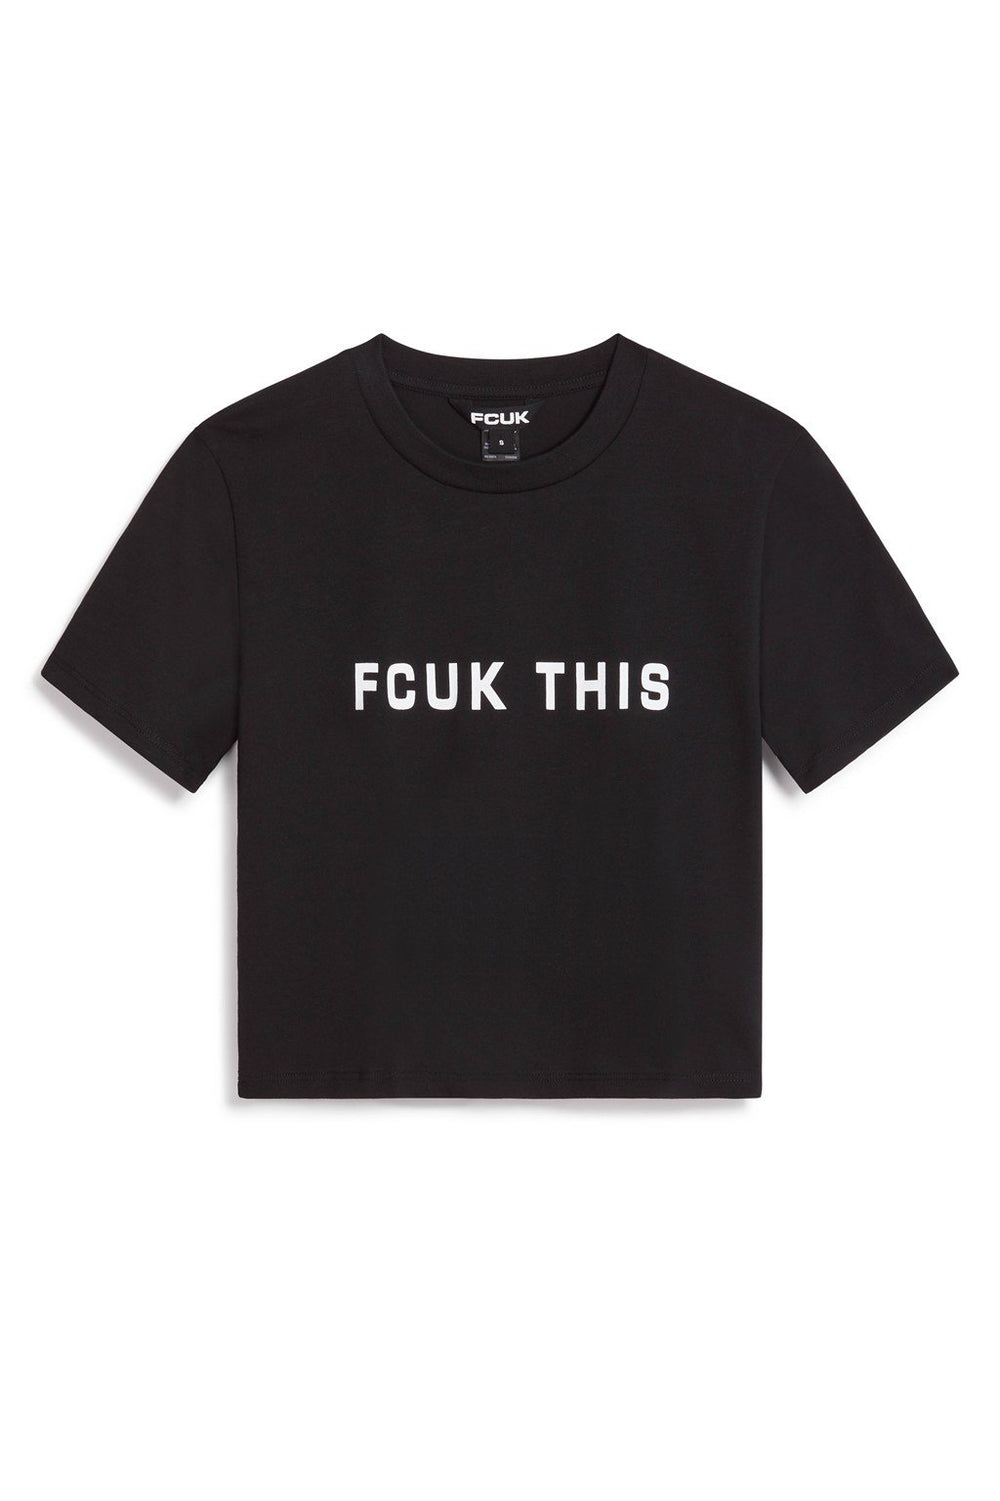 Meetbaar arm stopcontact FCUK THIS SHORT SLEEVE CROP TOP Black/White | French Connection US